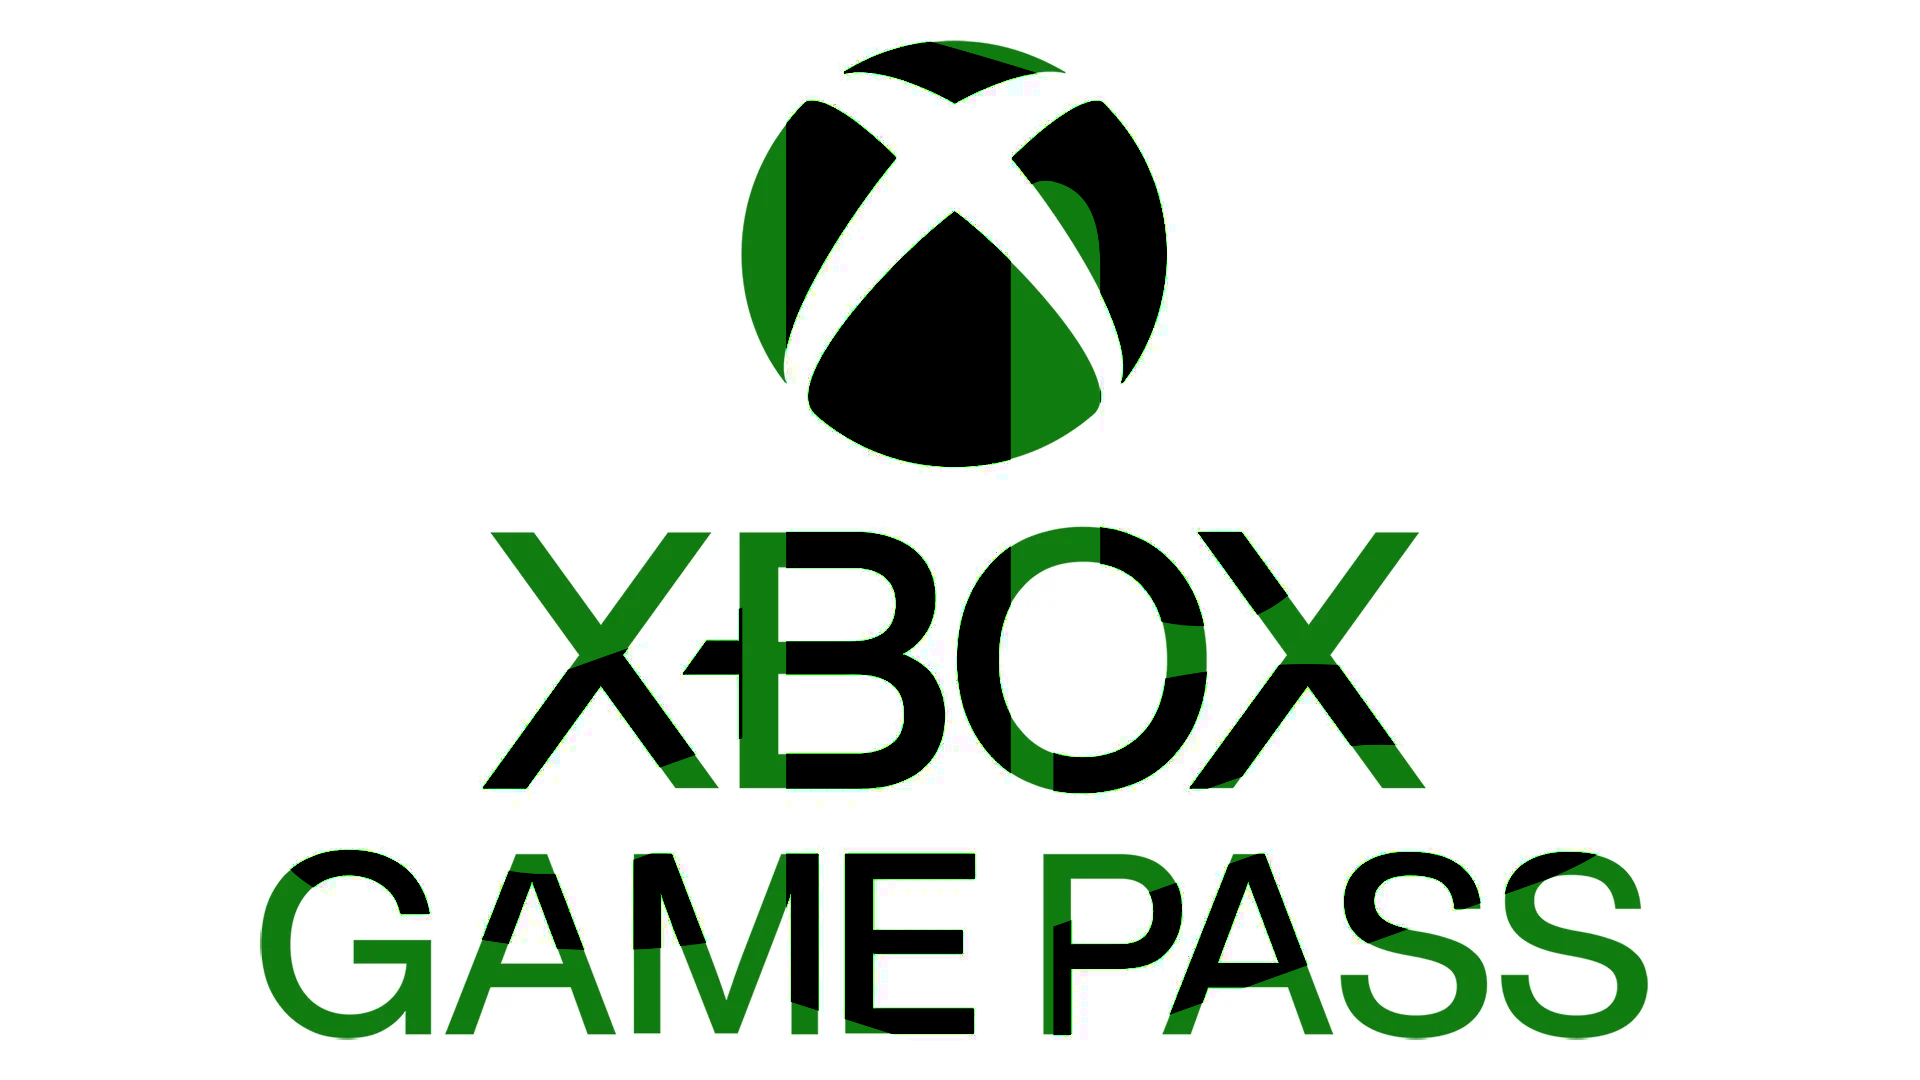 Xbox Game Pass Core to replace Live Gold in September